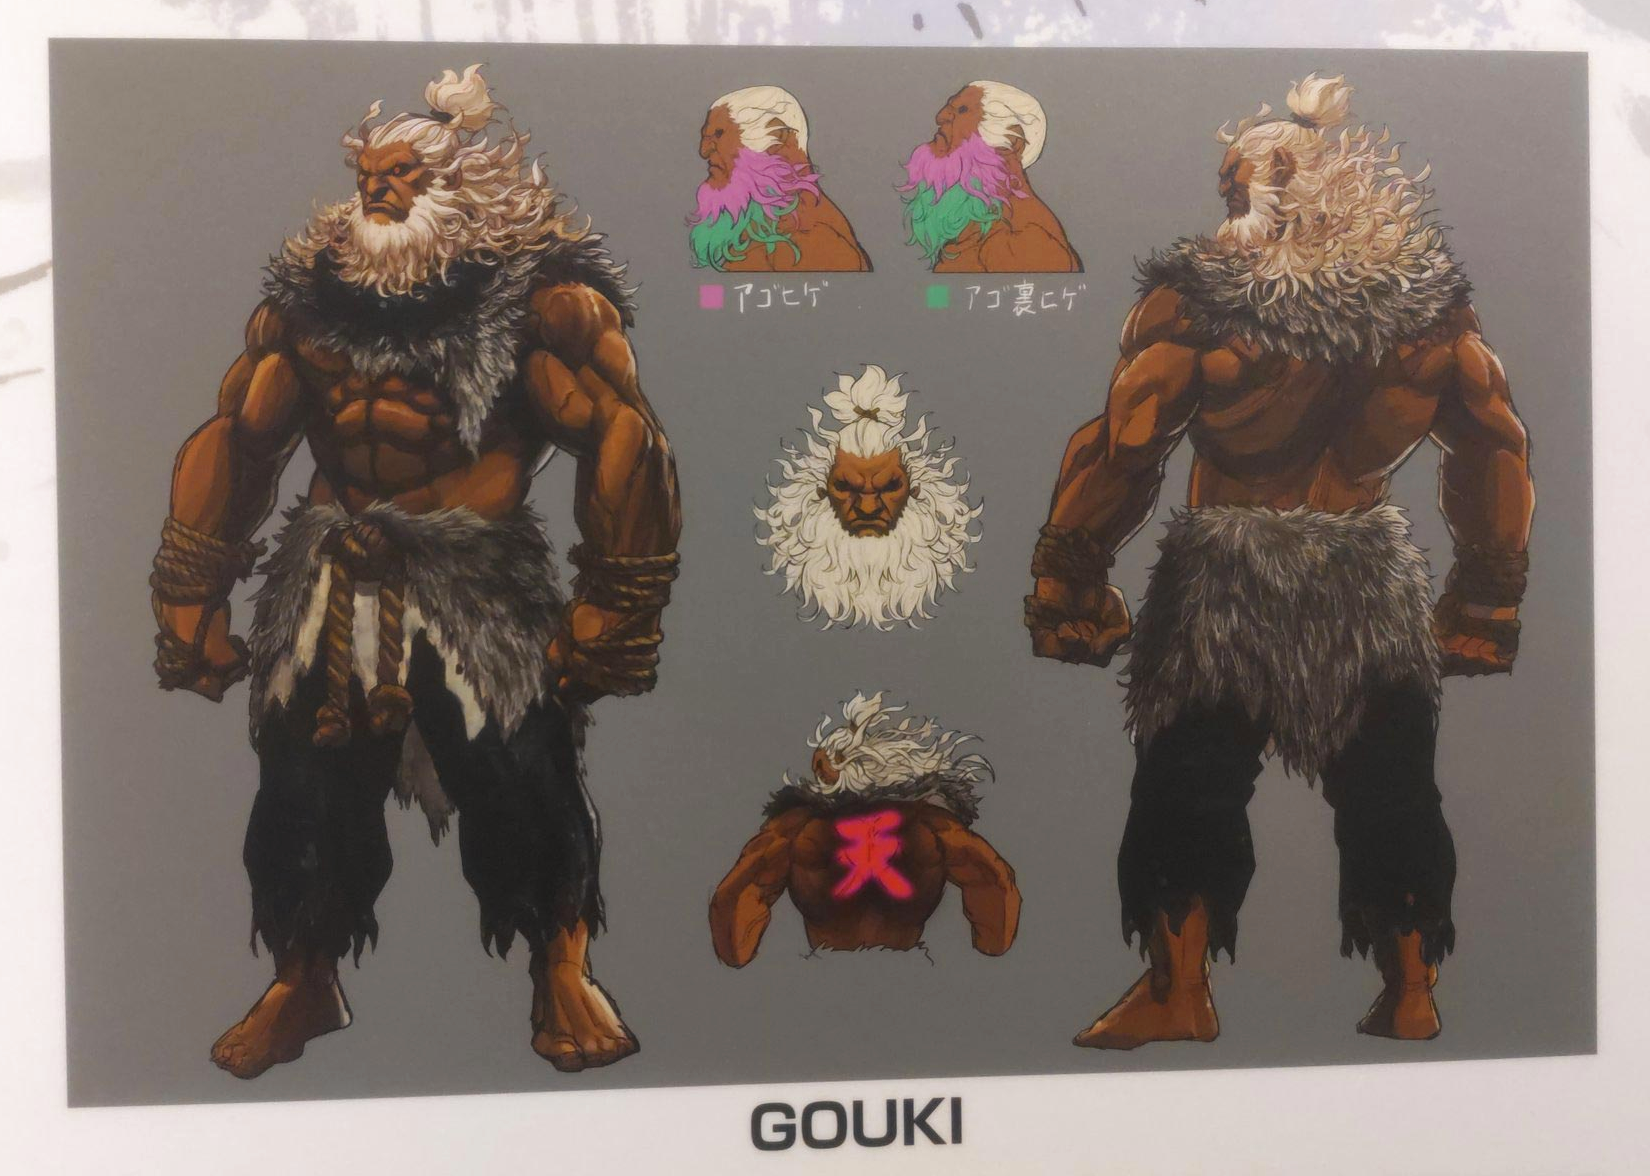 New Street Fighter 6 Akuma and Ed Concept Artwork Released